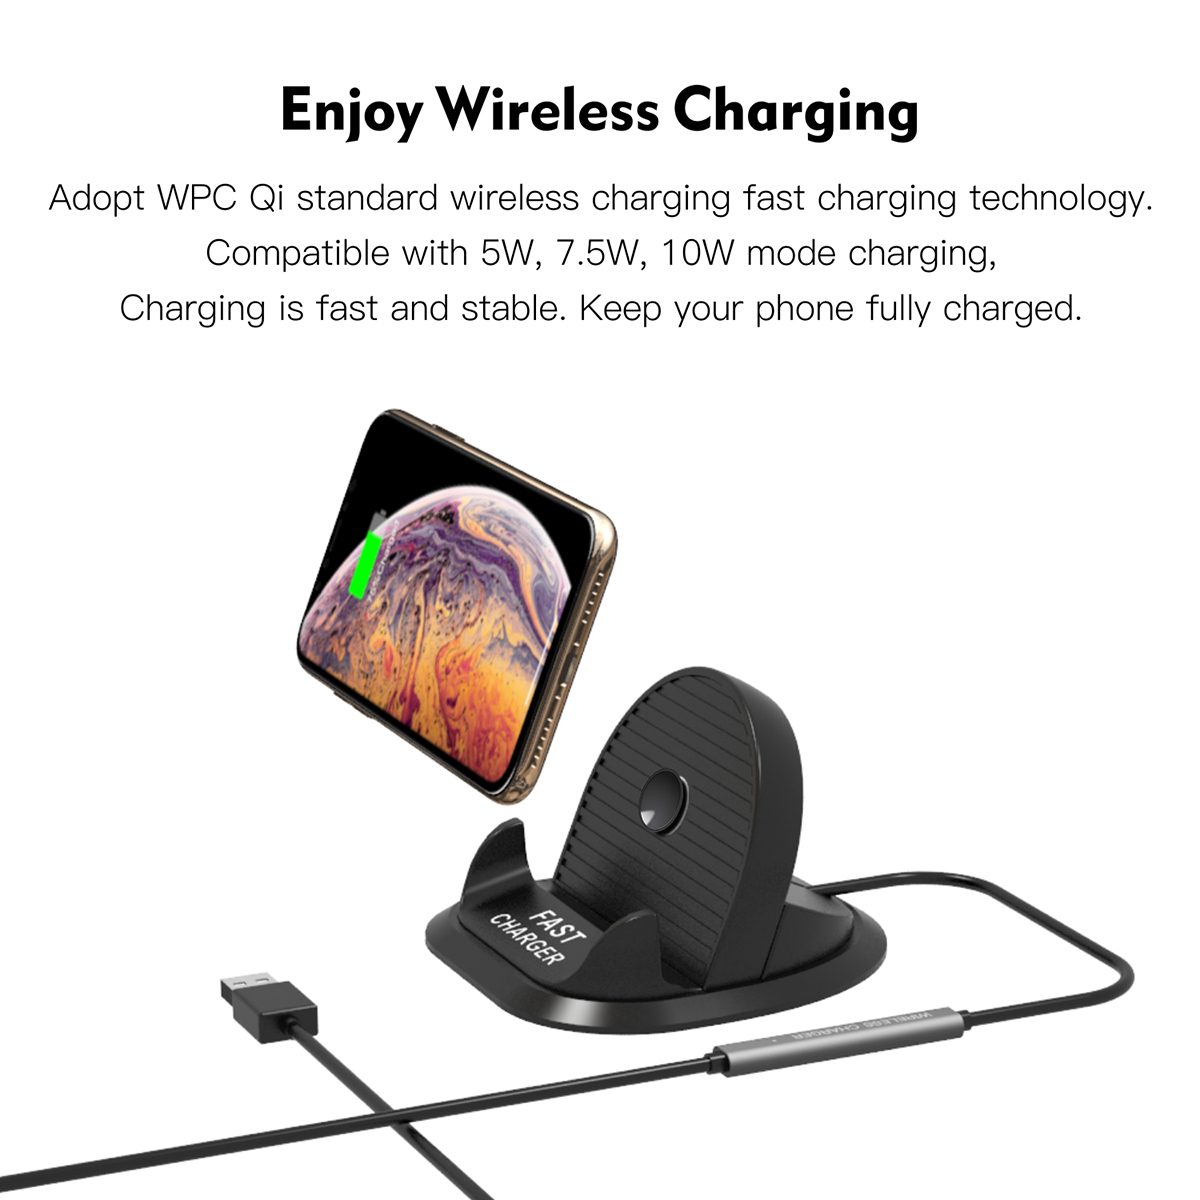 Bakeey-Wireless-Car-Charger-Base-5W75W10W-Wireless-Car-Holder-Charging-Bracket-For-iPhone-XS-11Pro-A-1707697-4